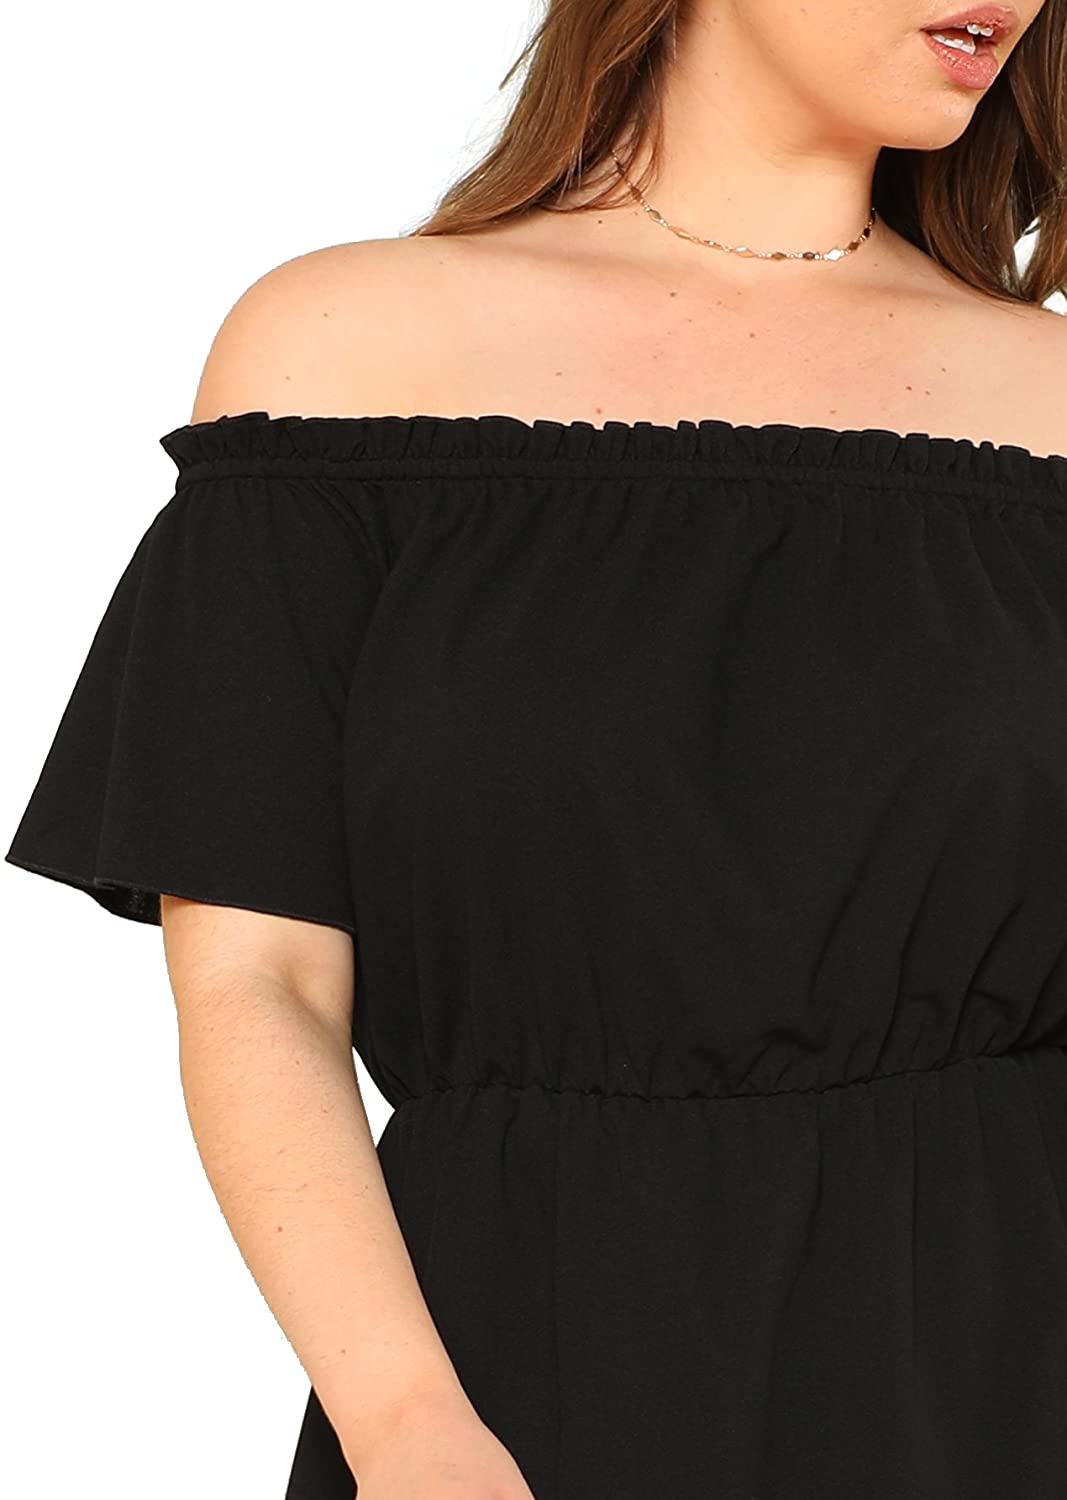 Romwe Women's Plus Size Off The Shoulder Hollowed Out Scallop Hem Party ...